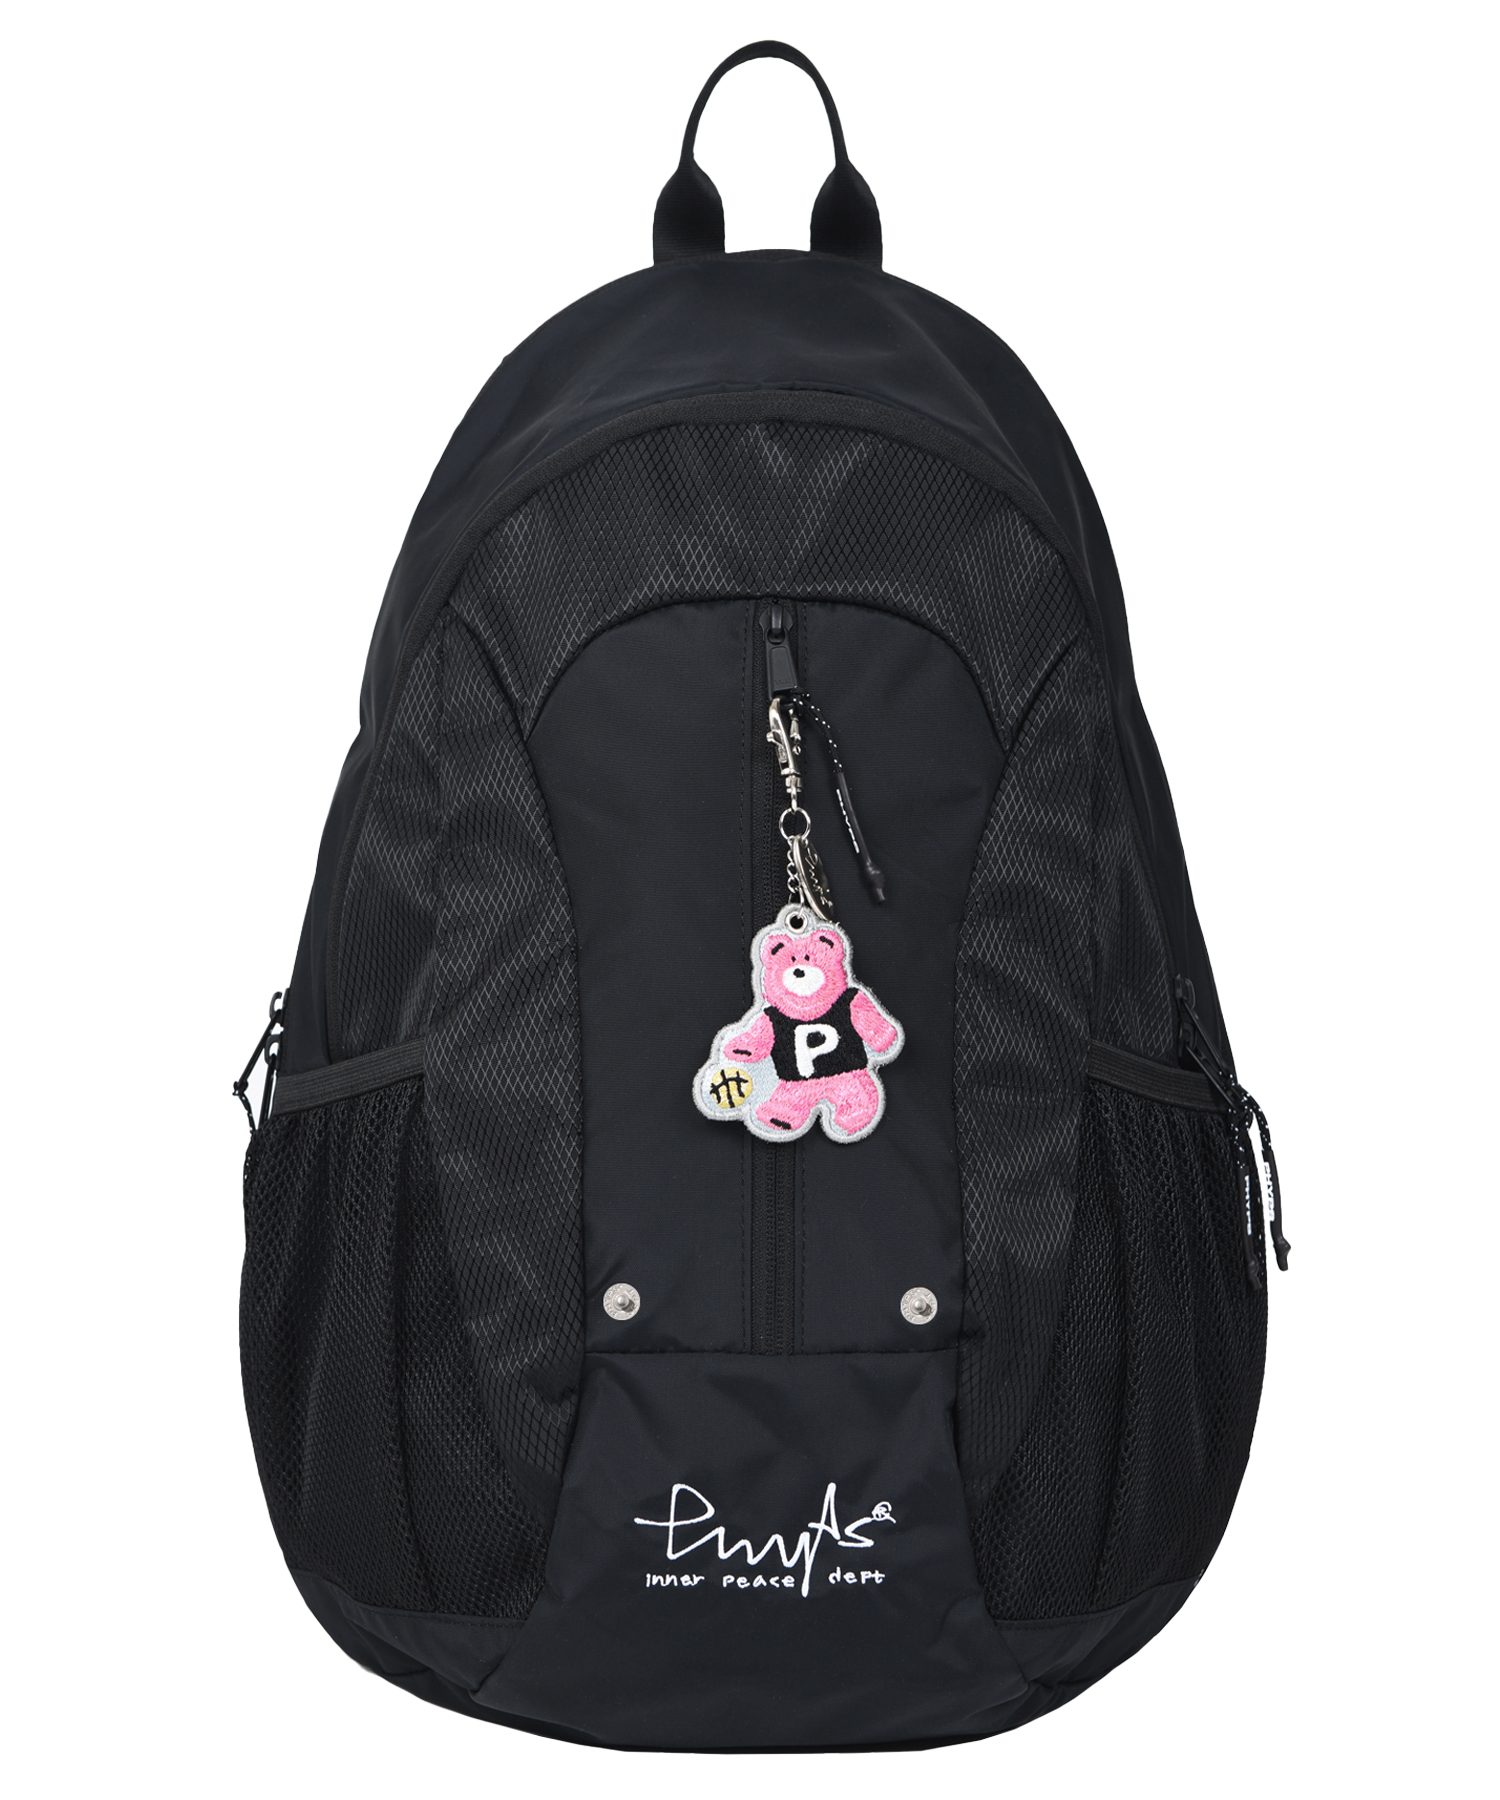 PHYPS® SPORTS UTILITY BACKPACK